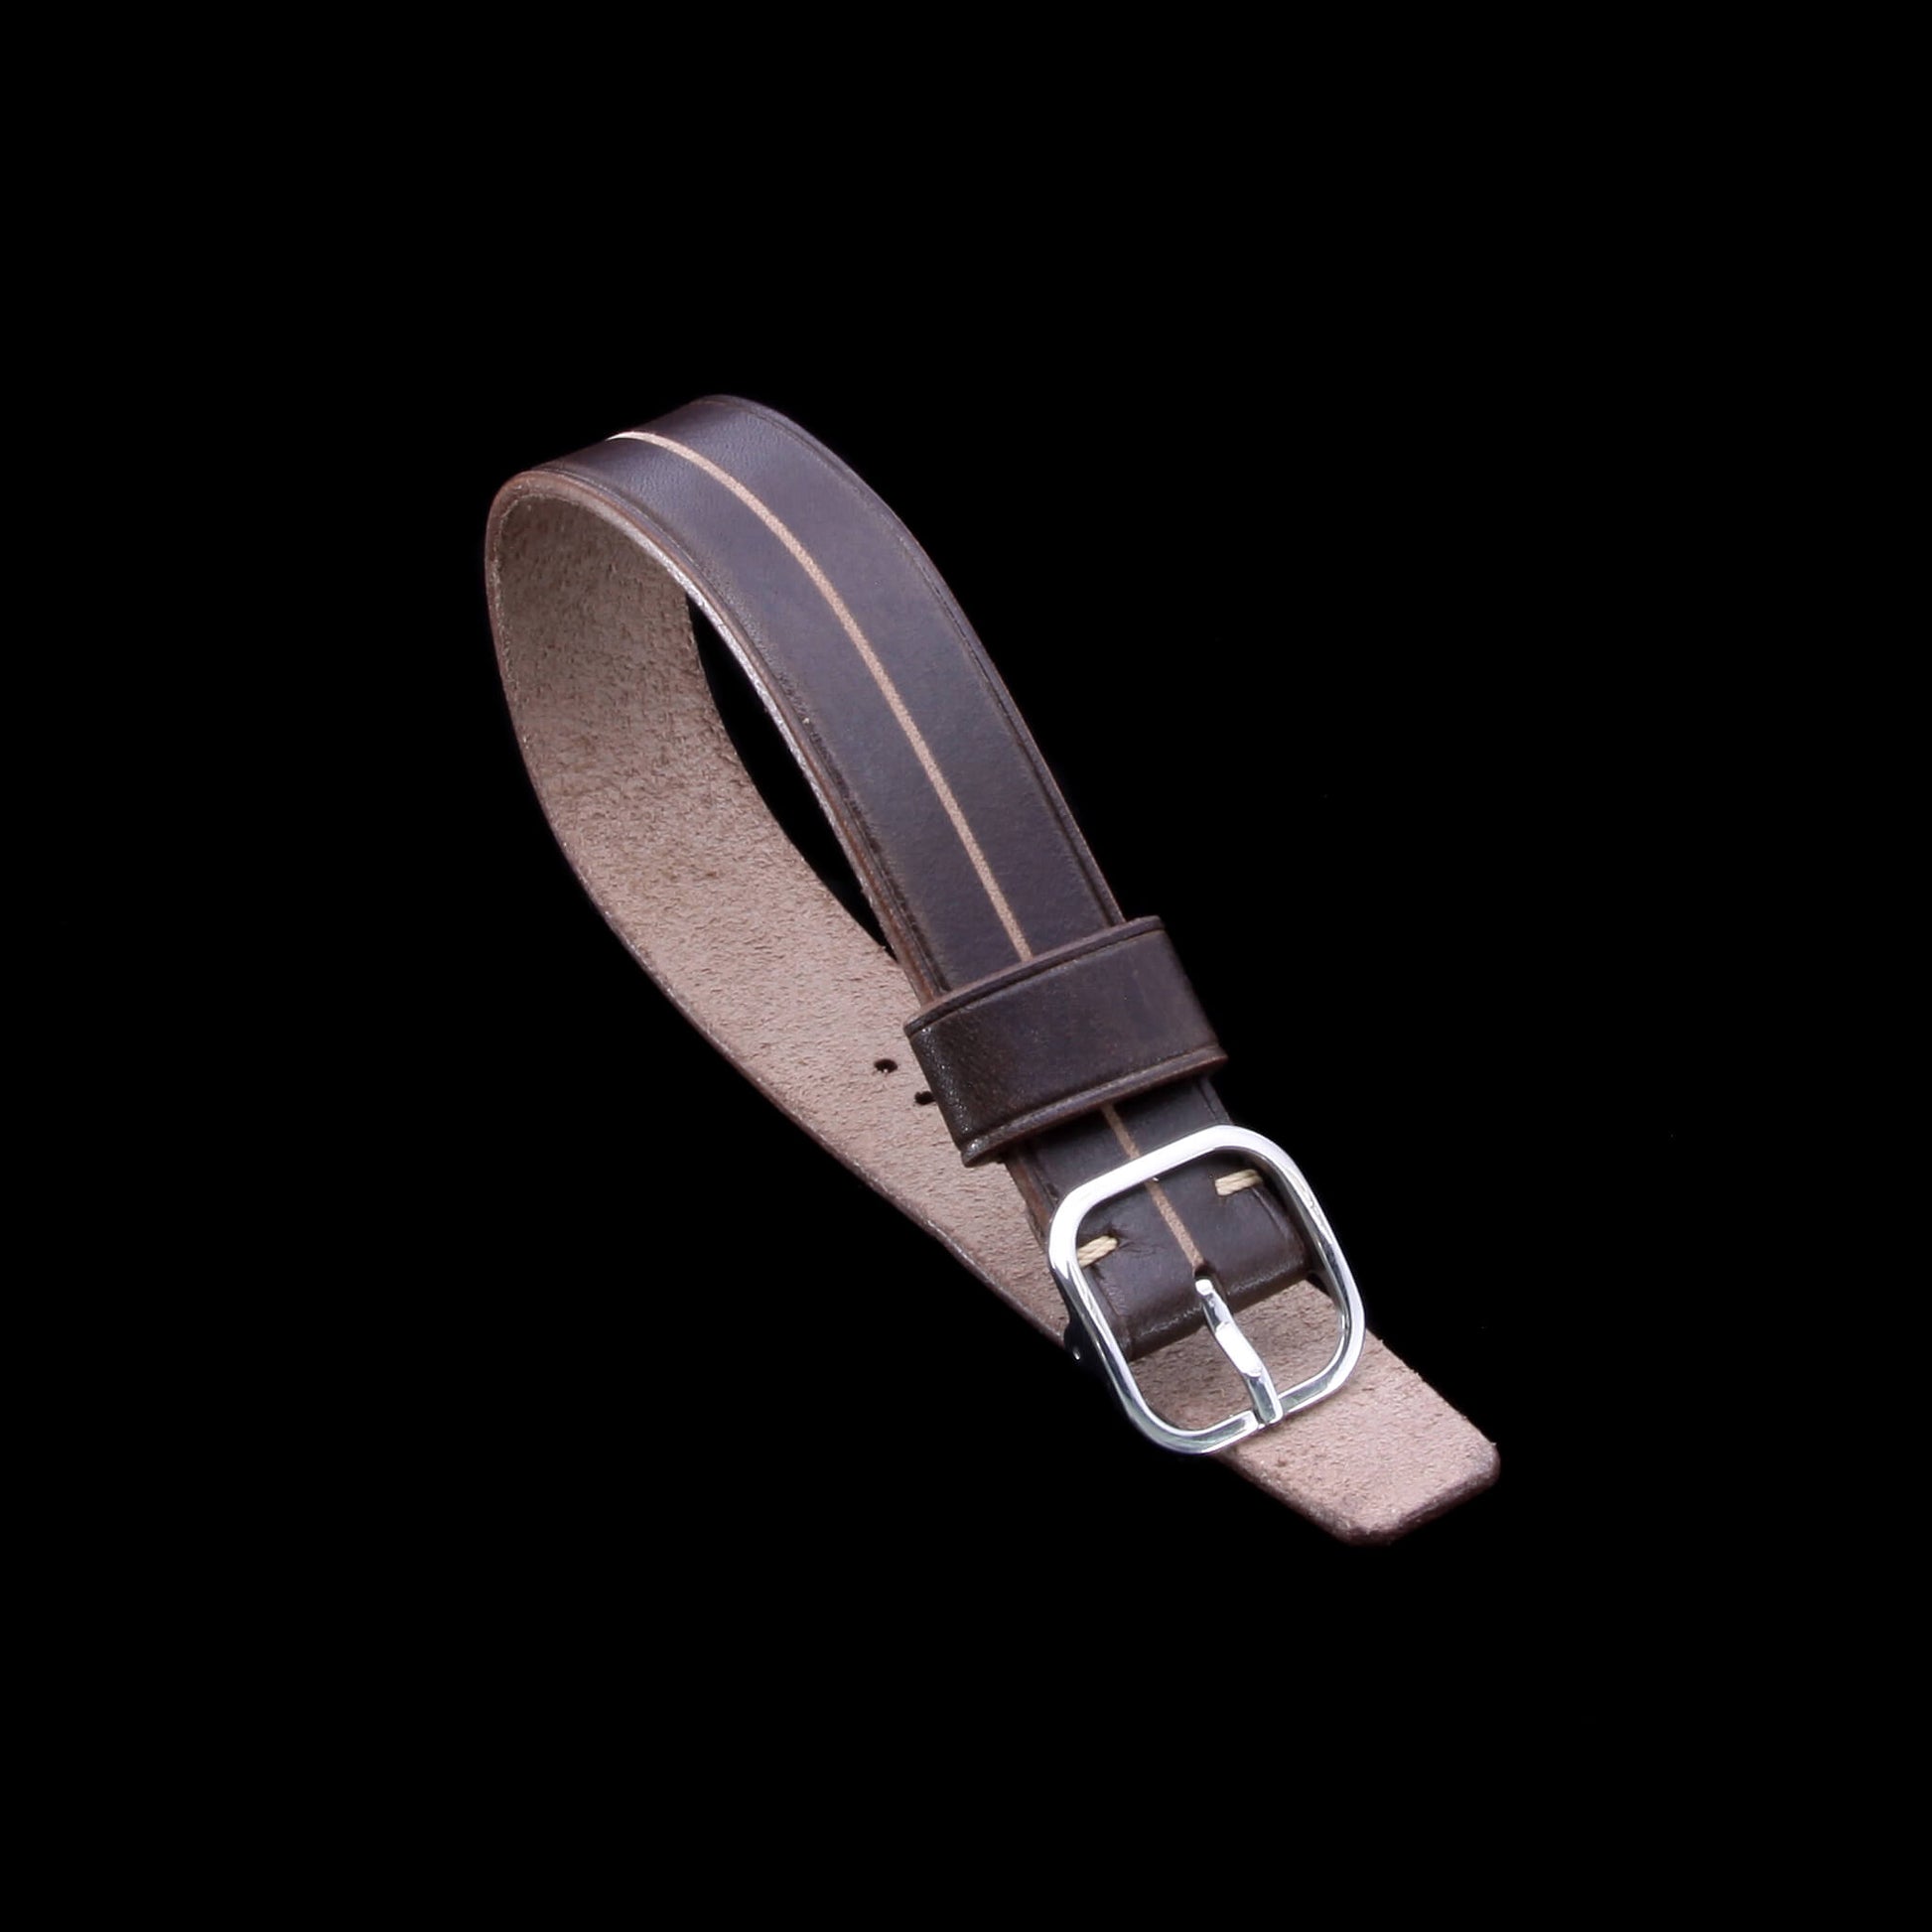 Dark Brown Italian Vegetable-Tanned Leather Watch Strap by Cozy Handmade - Garrison Sequoia 106 (Single Pass)